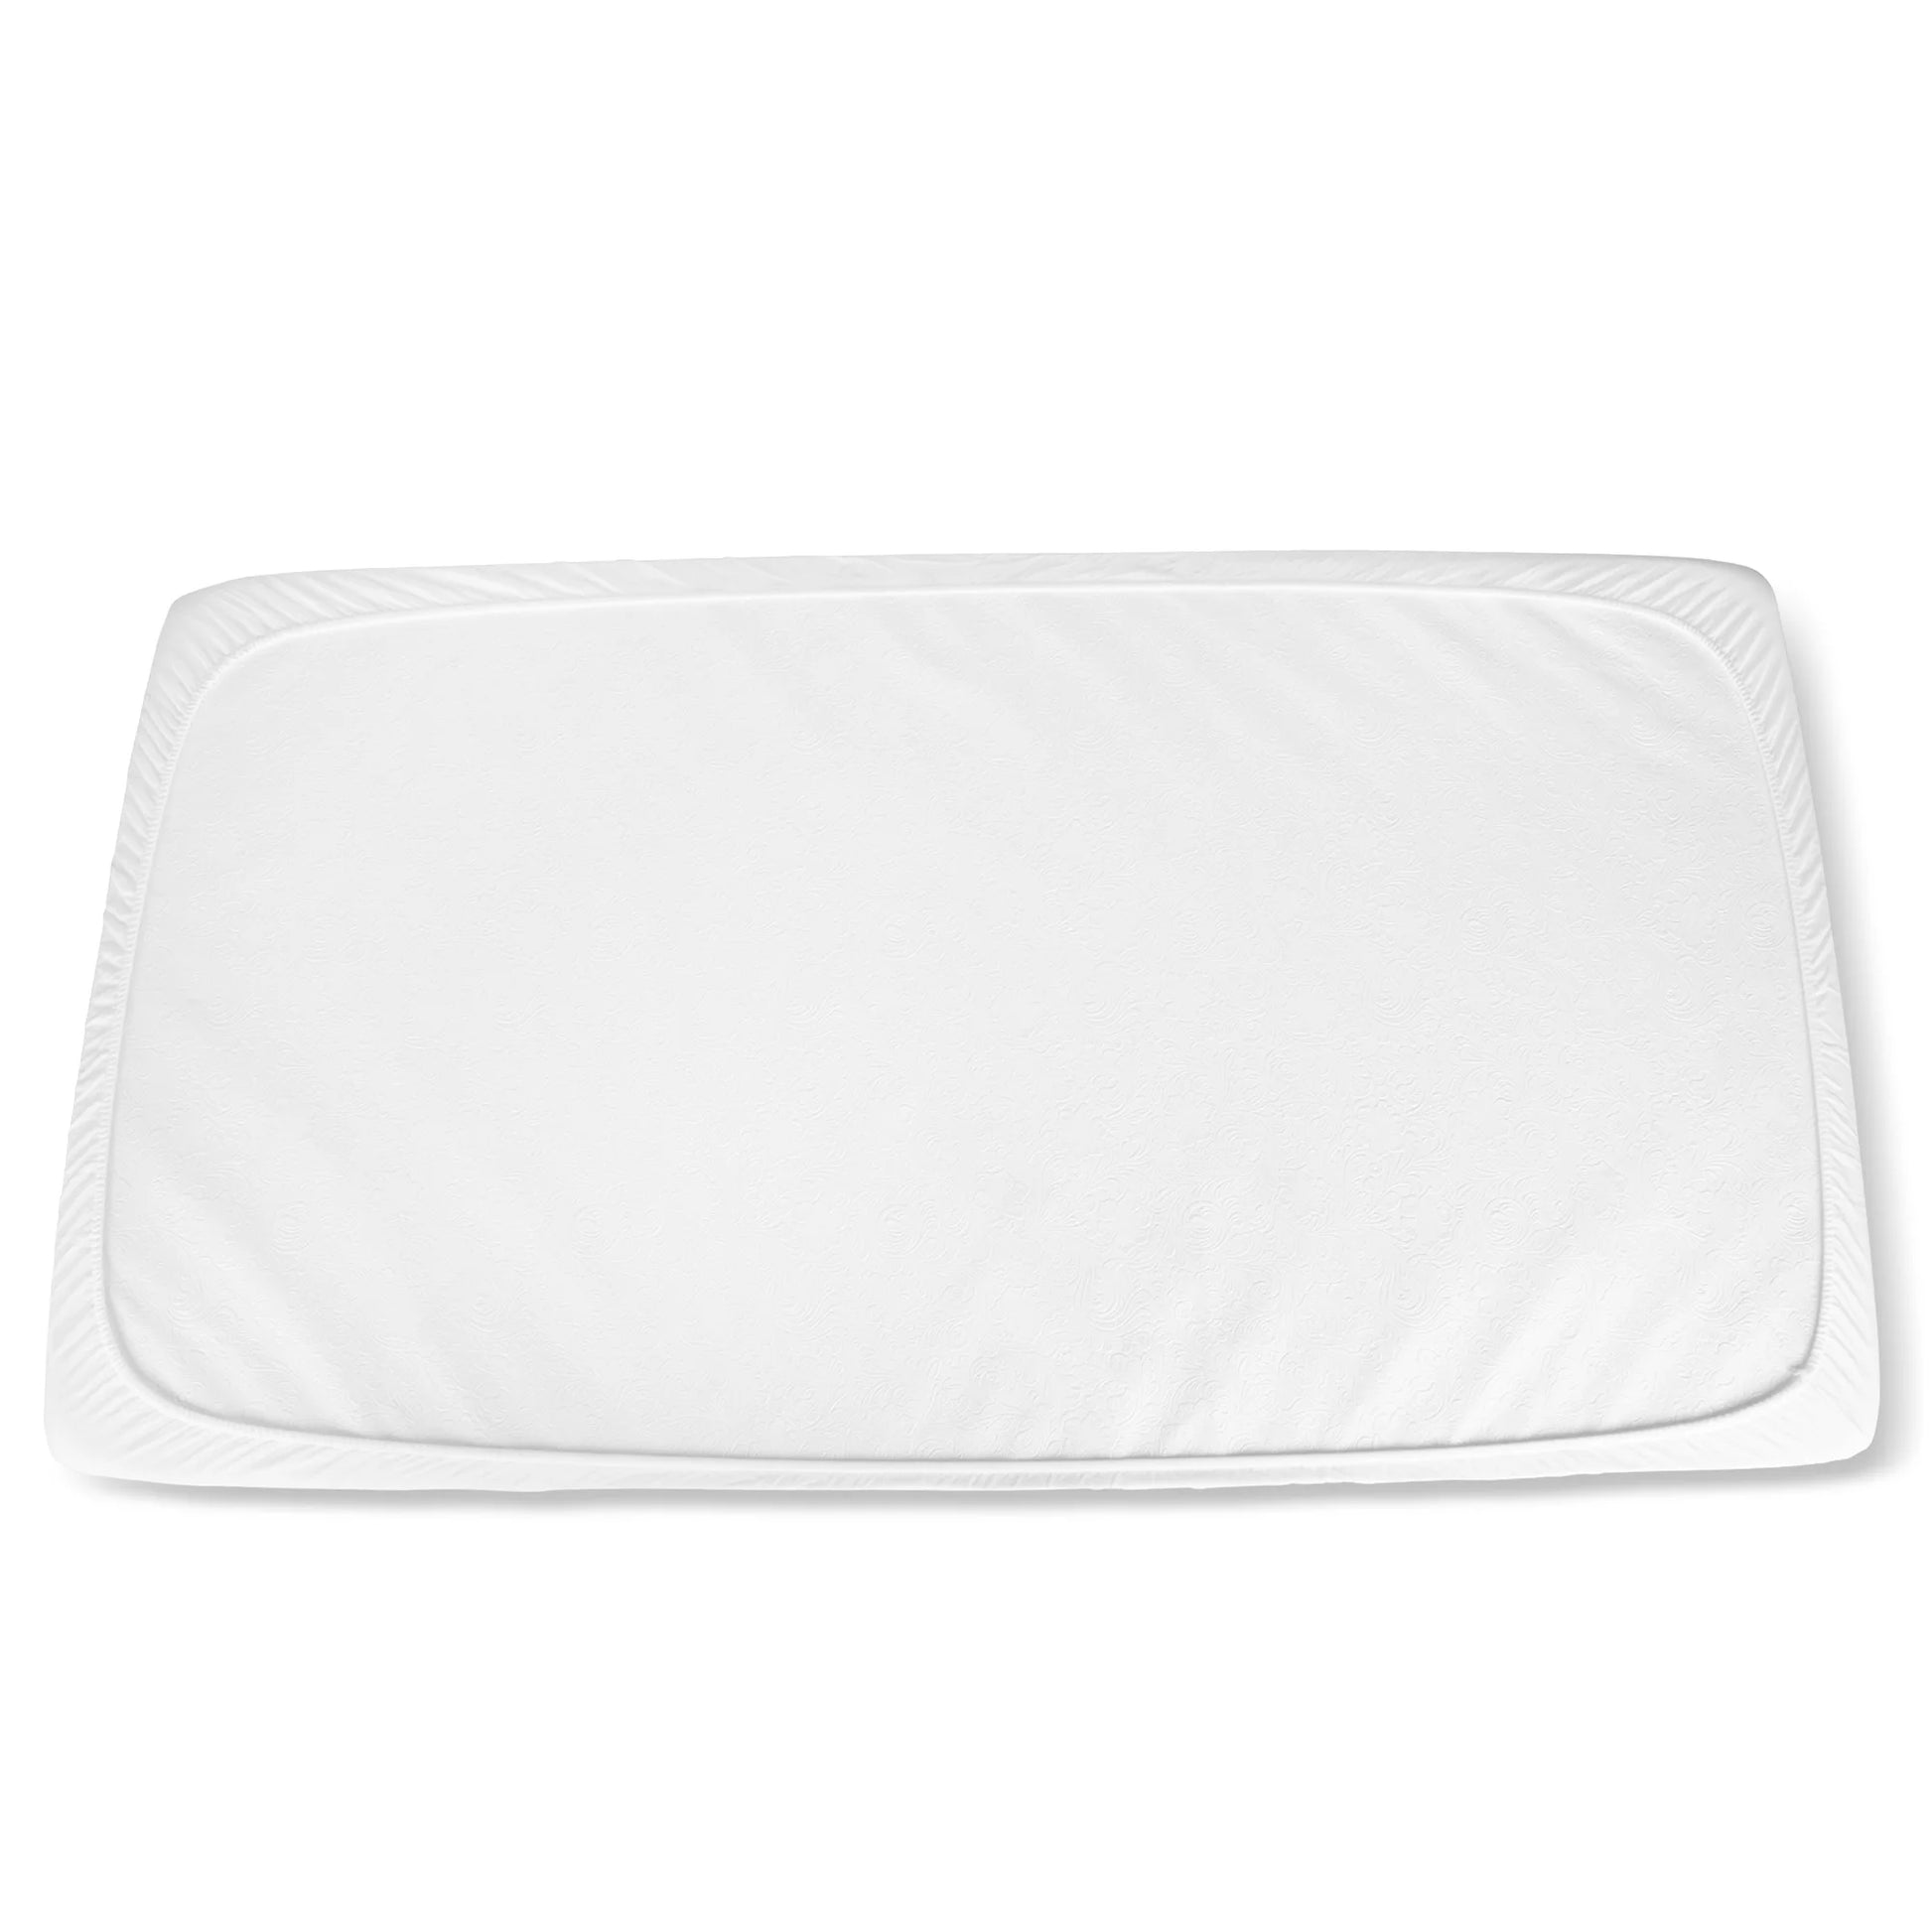 Cotton Sateen Luxury Mattress Pad - Soft and Comfortable with Thick and Odorless Alternative down Filling - Weaved with 300 Thread Count - Crib